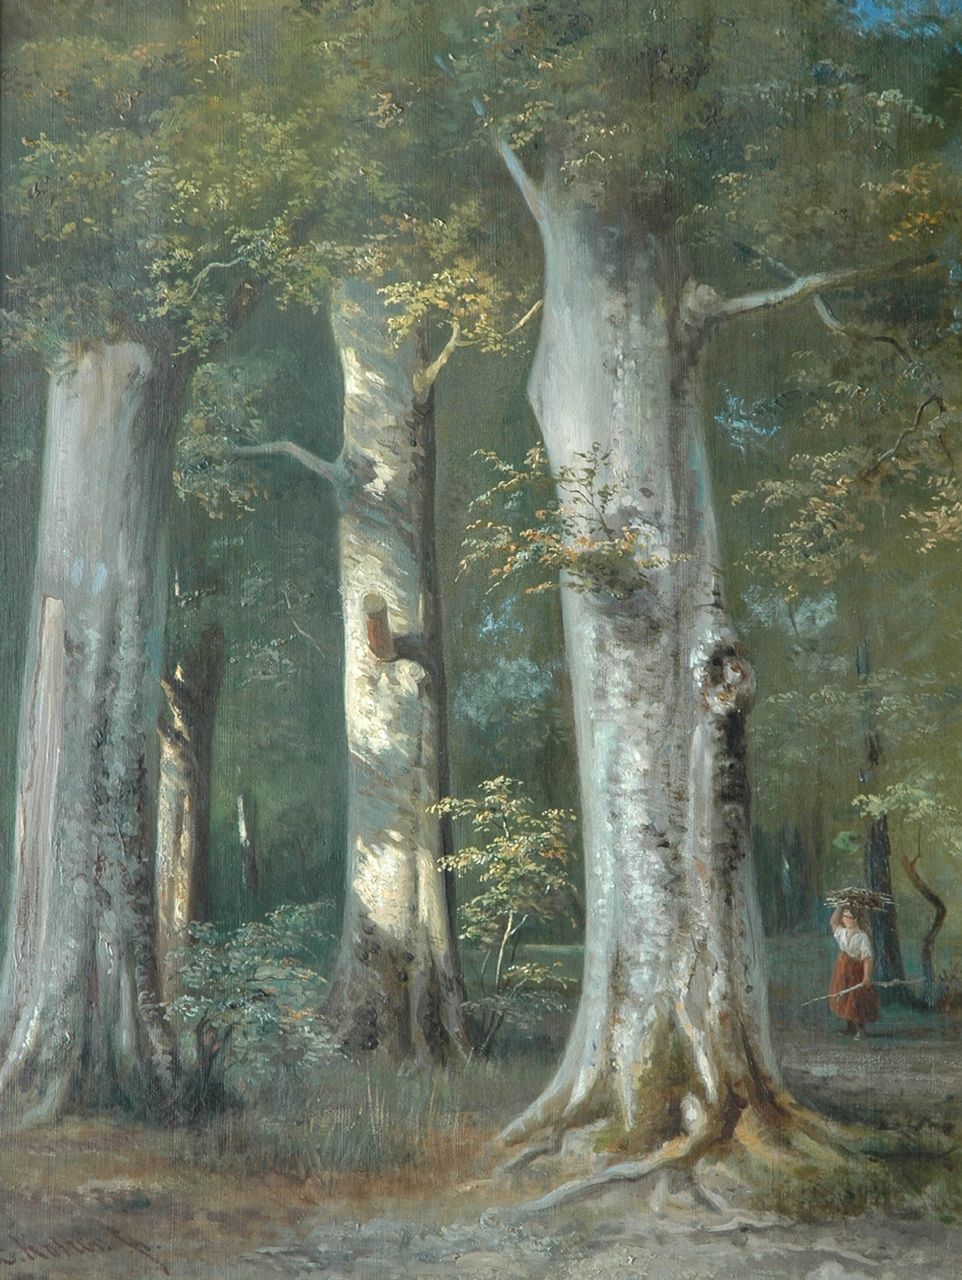 Koster E.  | Everhardus Koster, A country girl in the forest, Öl auf Leinwand 67,4 x 53,0 cm, signed l.l.